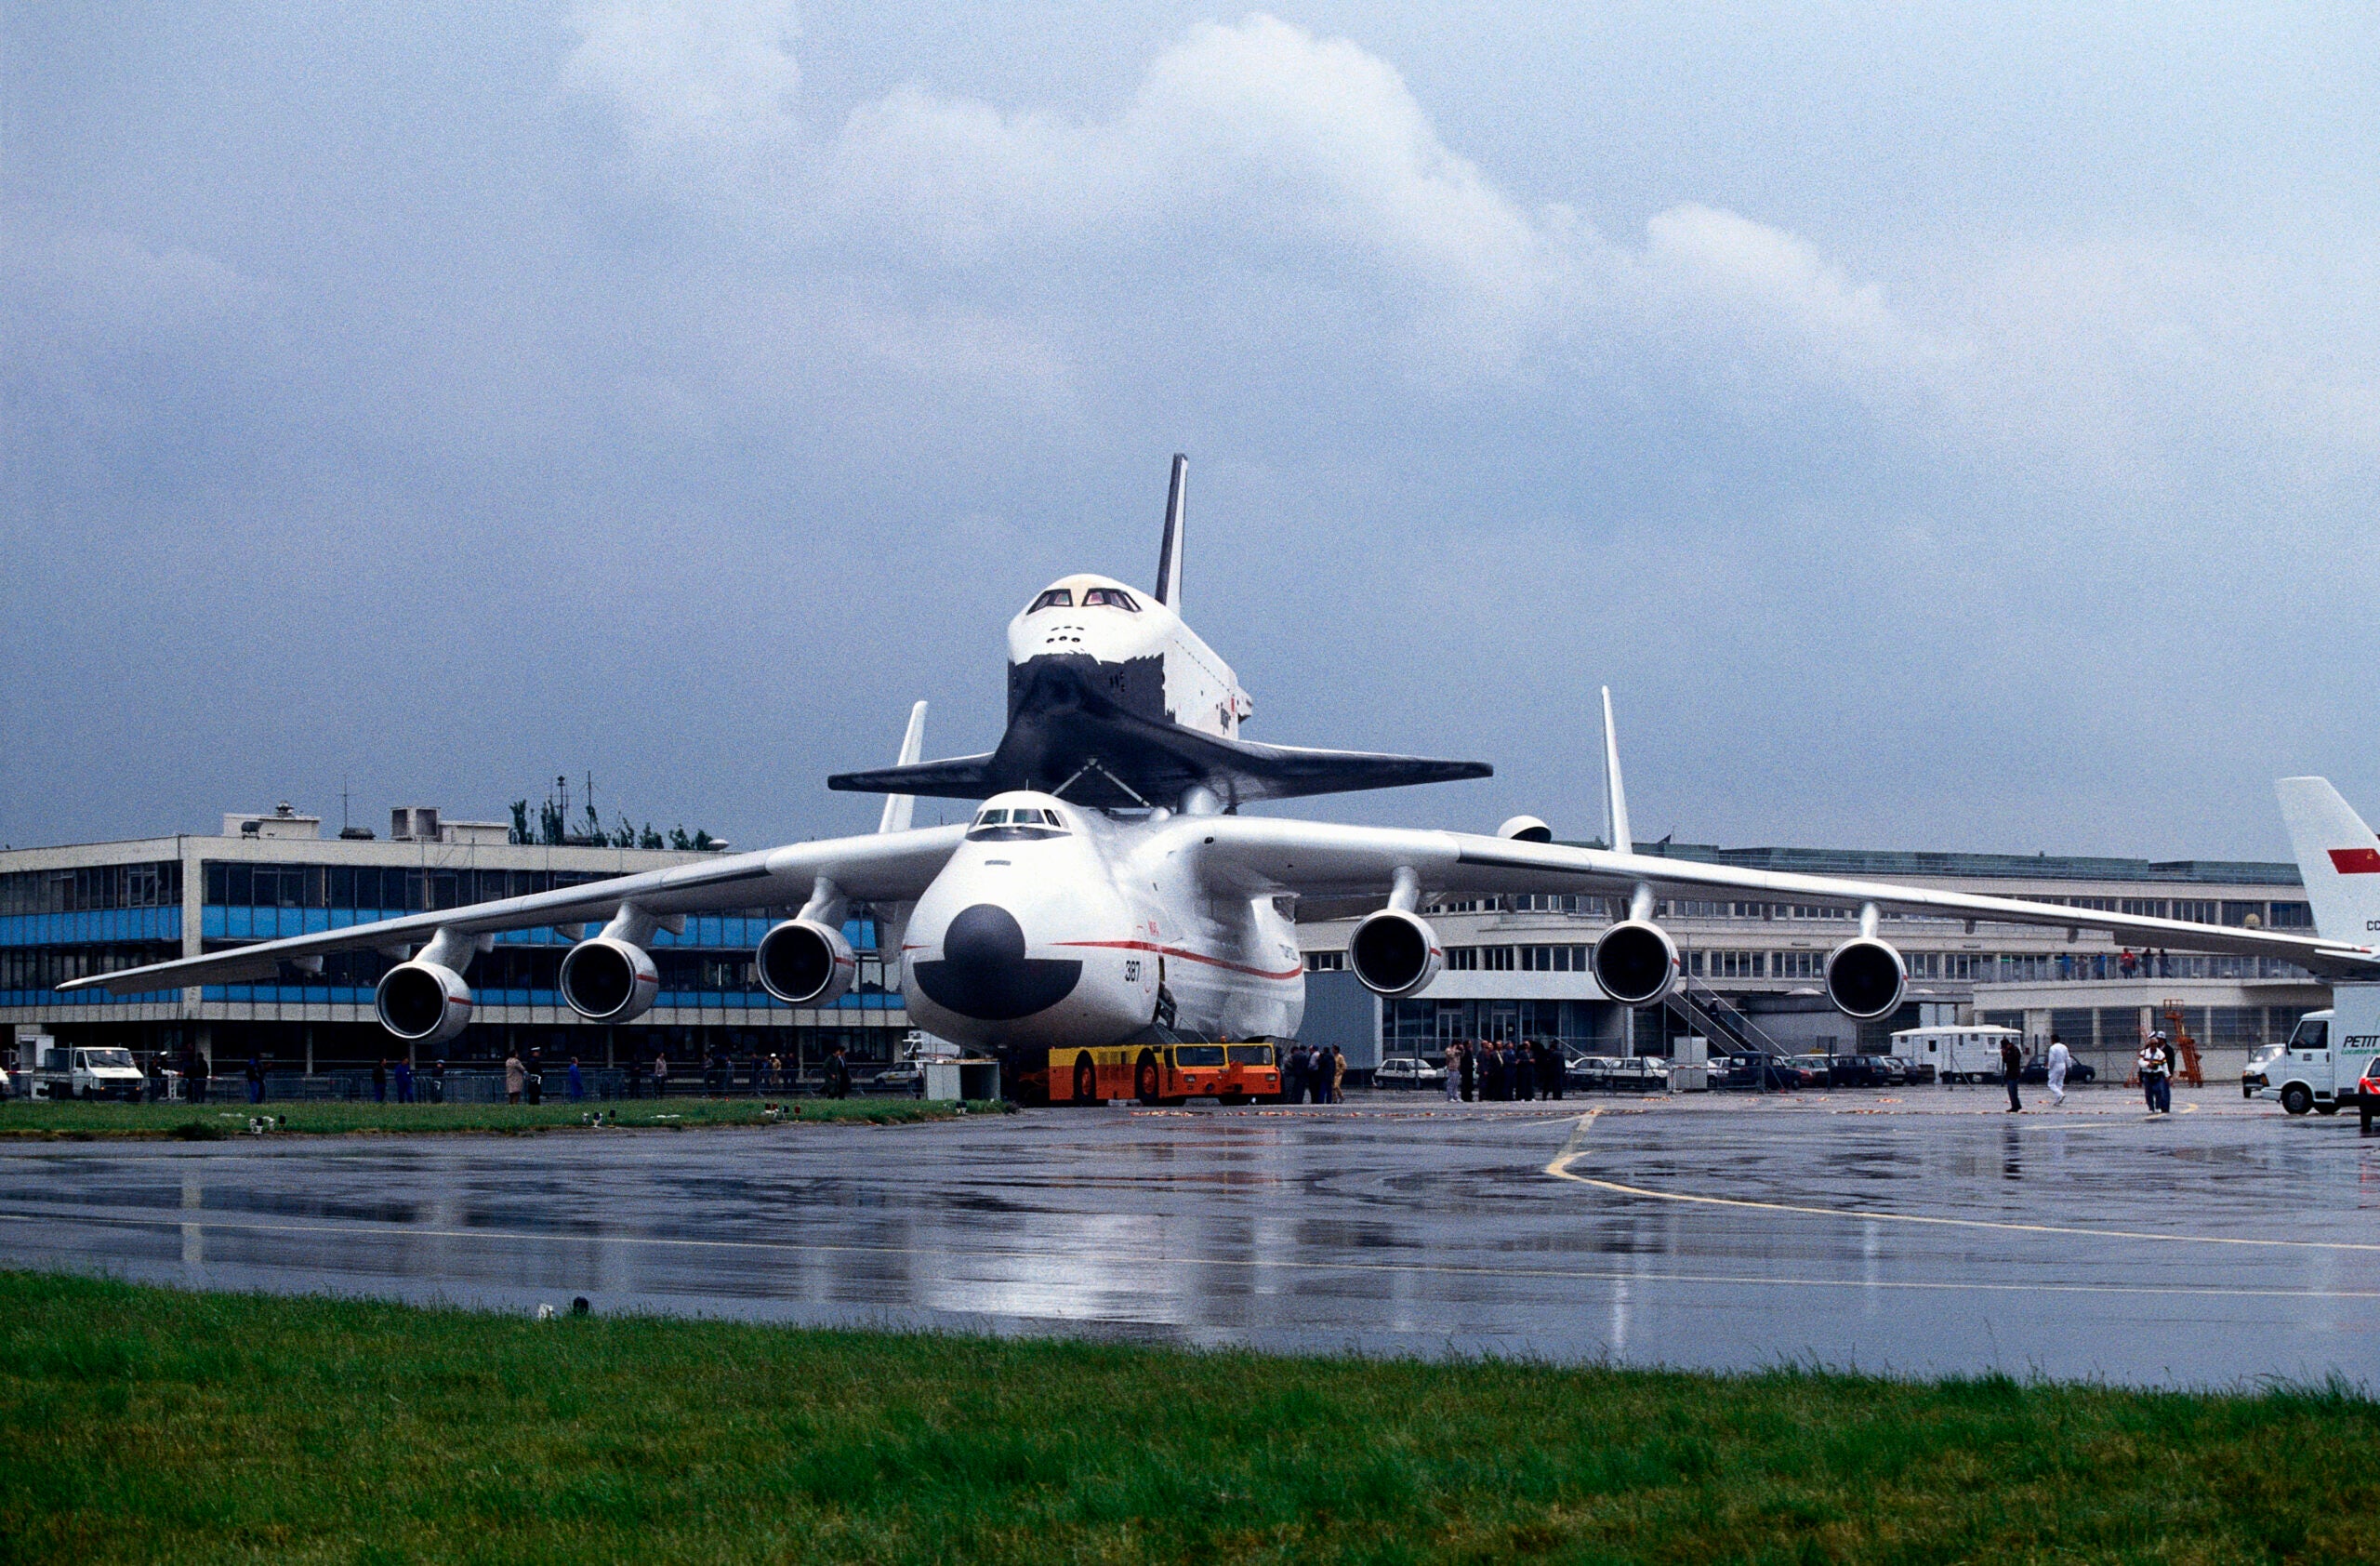 Antonov An-225 Mriya Cossack being towed by a tug with a towbar at the 1989 Paris Airshow with the Soviet Buran space shuttle on its back. (Photo by: aviation-images.com/Universal Images Group via Getty Images)